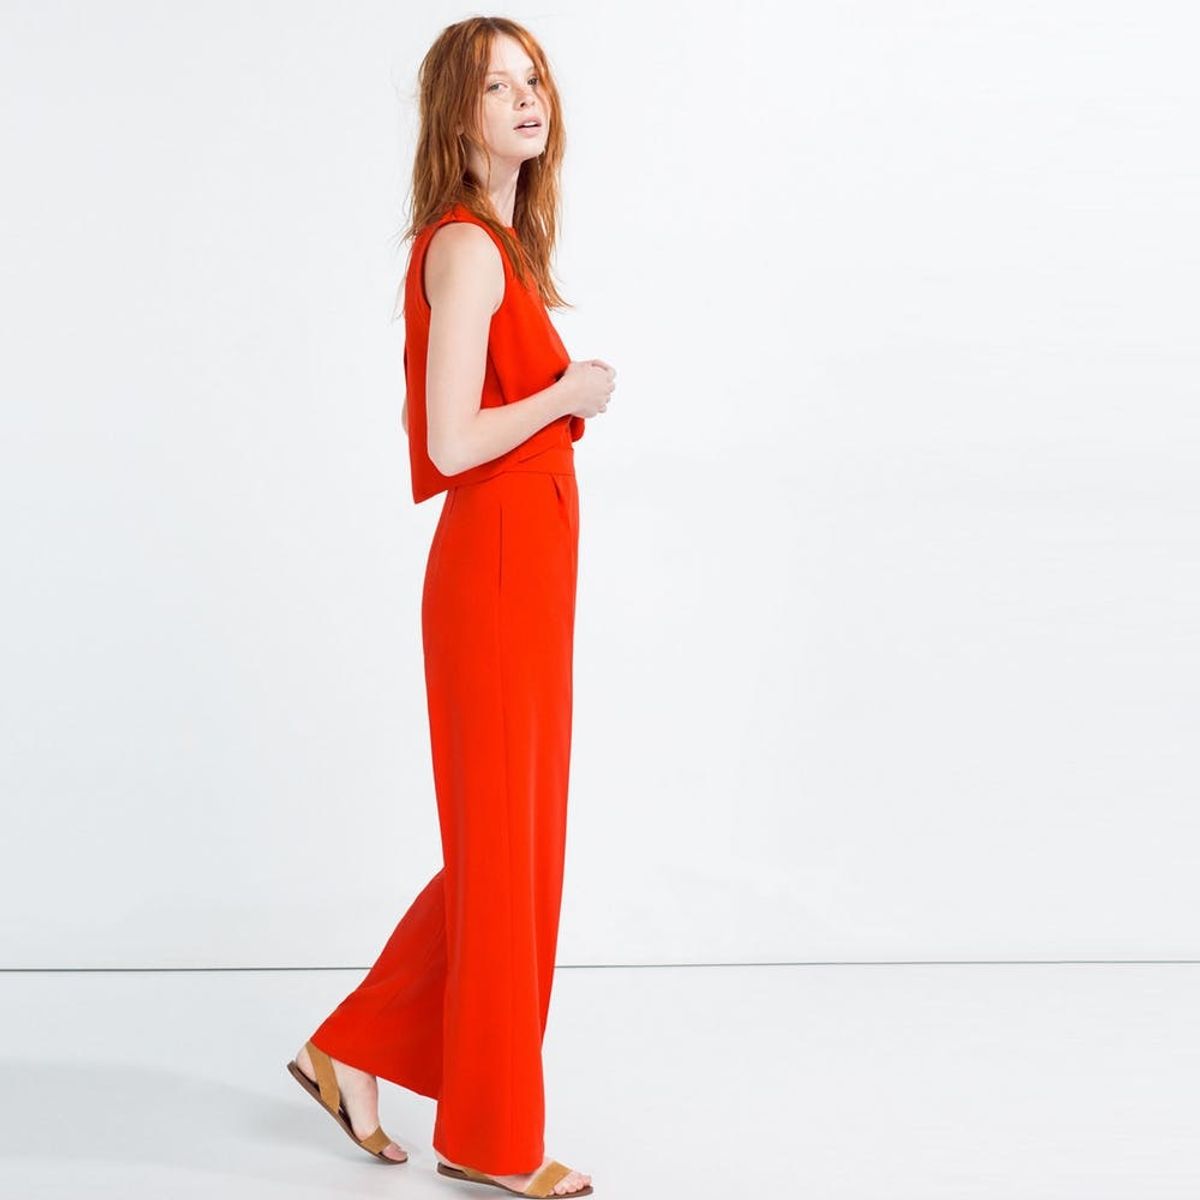 22 Jumpsuits That Make a Perfectly Effortless Spring Outfit